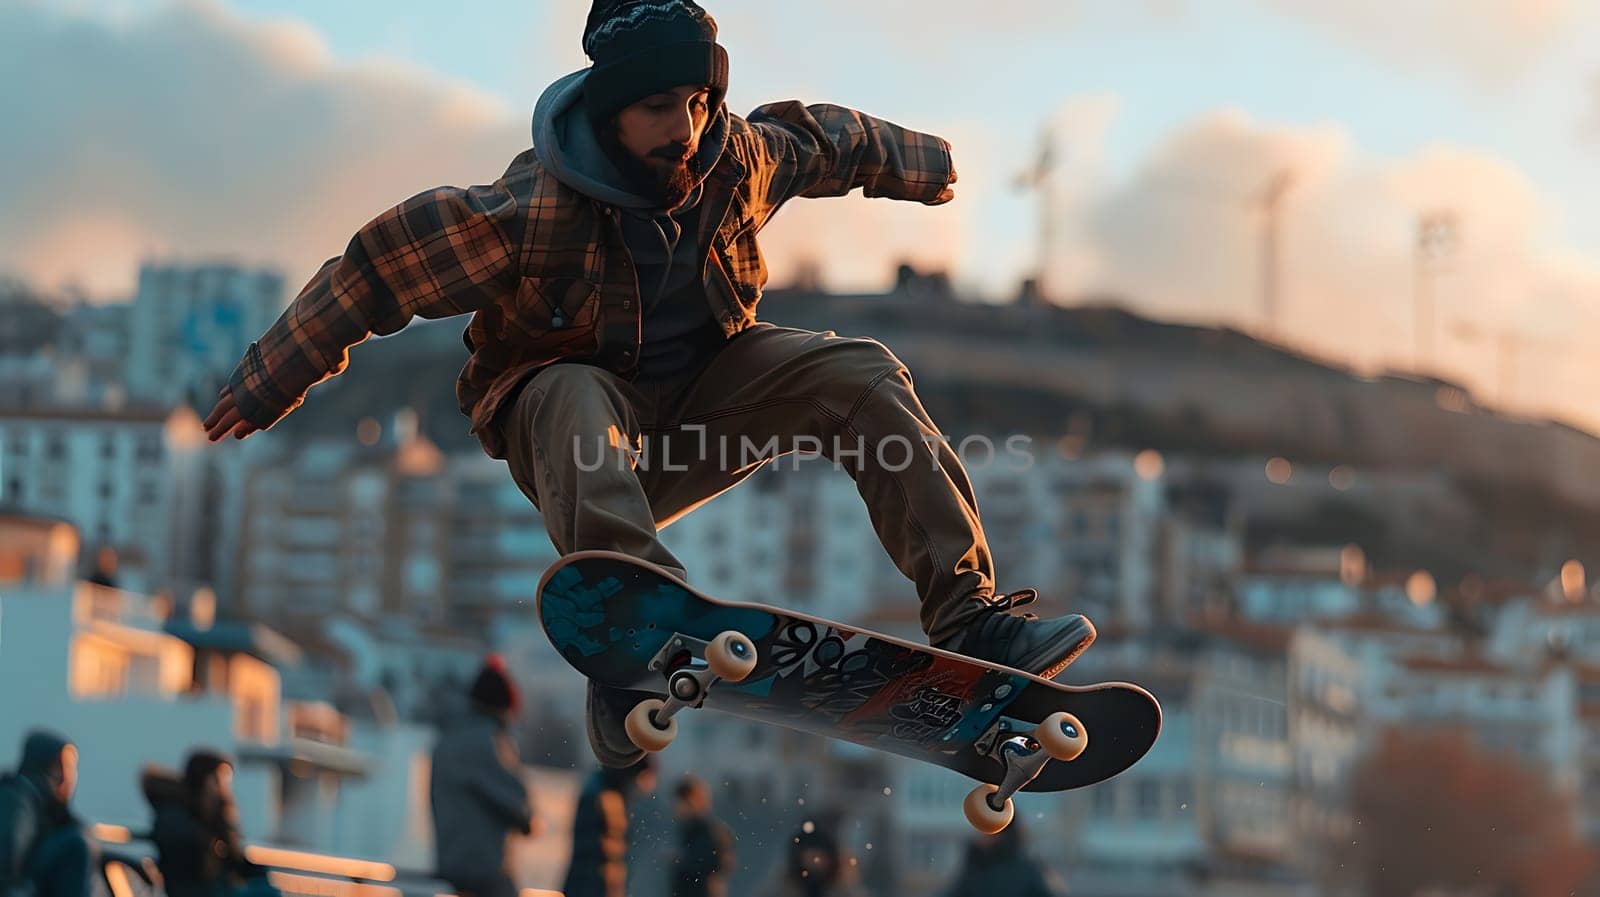 A stunt performer is executing a trick on a skateboard in the sky, showcasing the art of extreme sports. This actionpacked recreation event resembles an actionadventure game